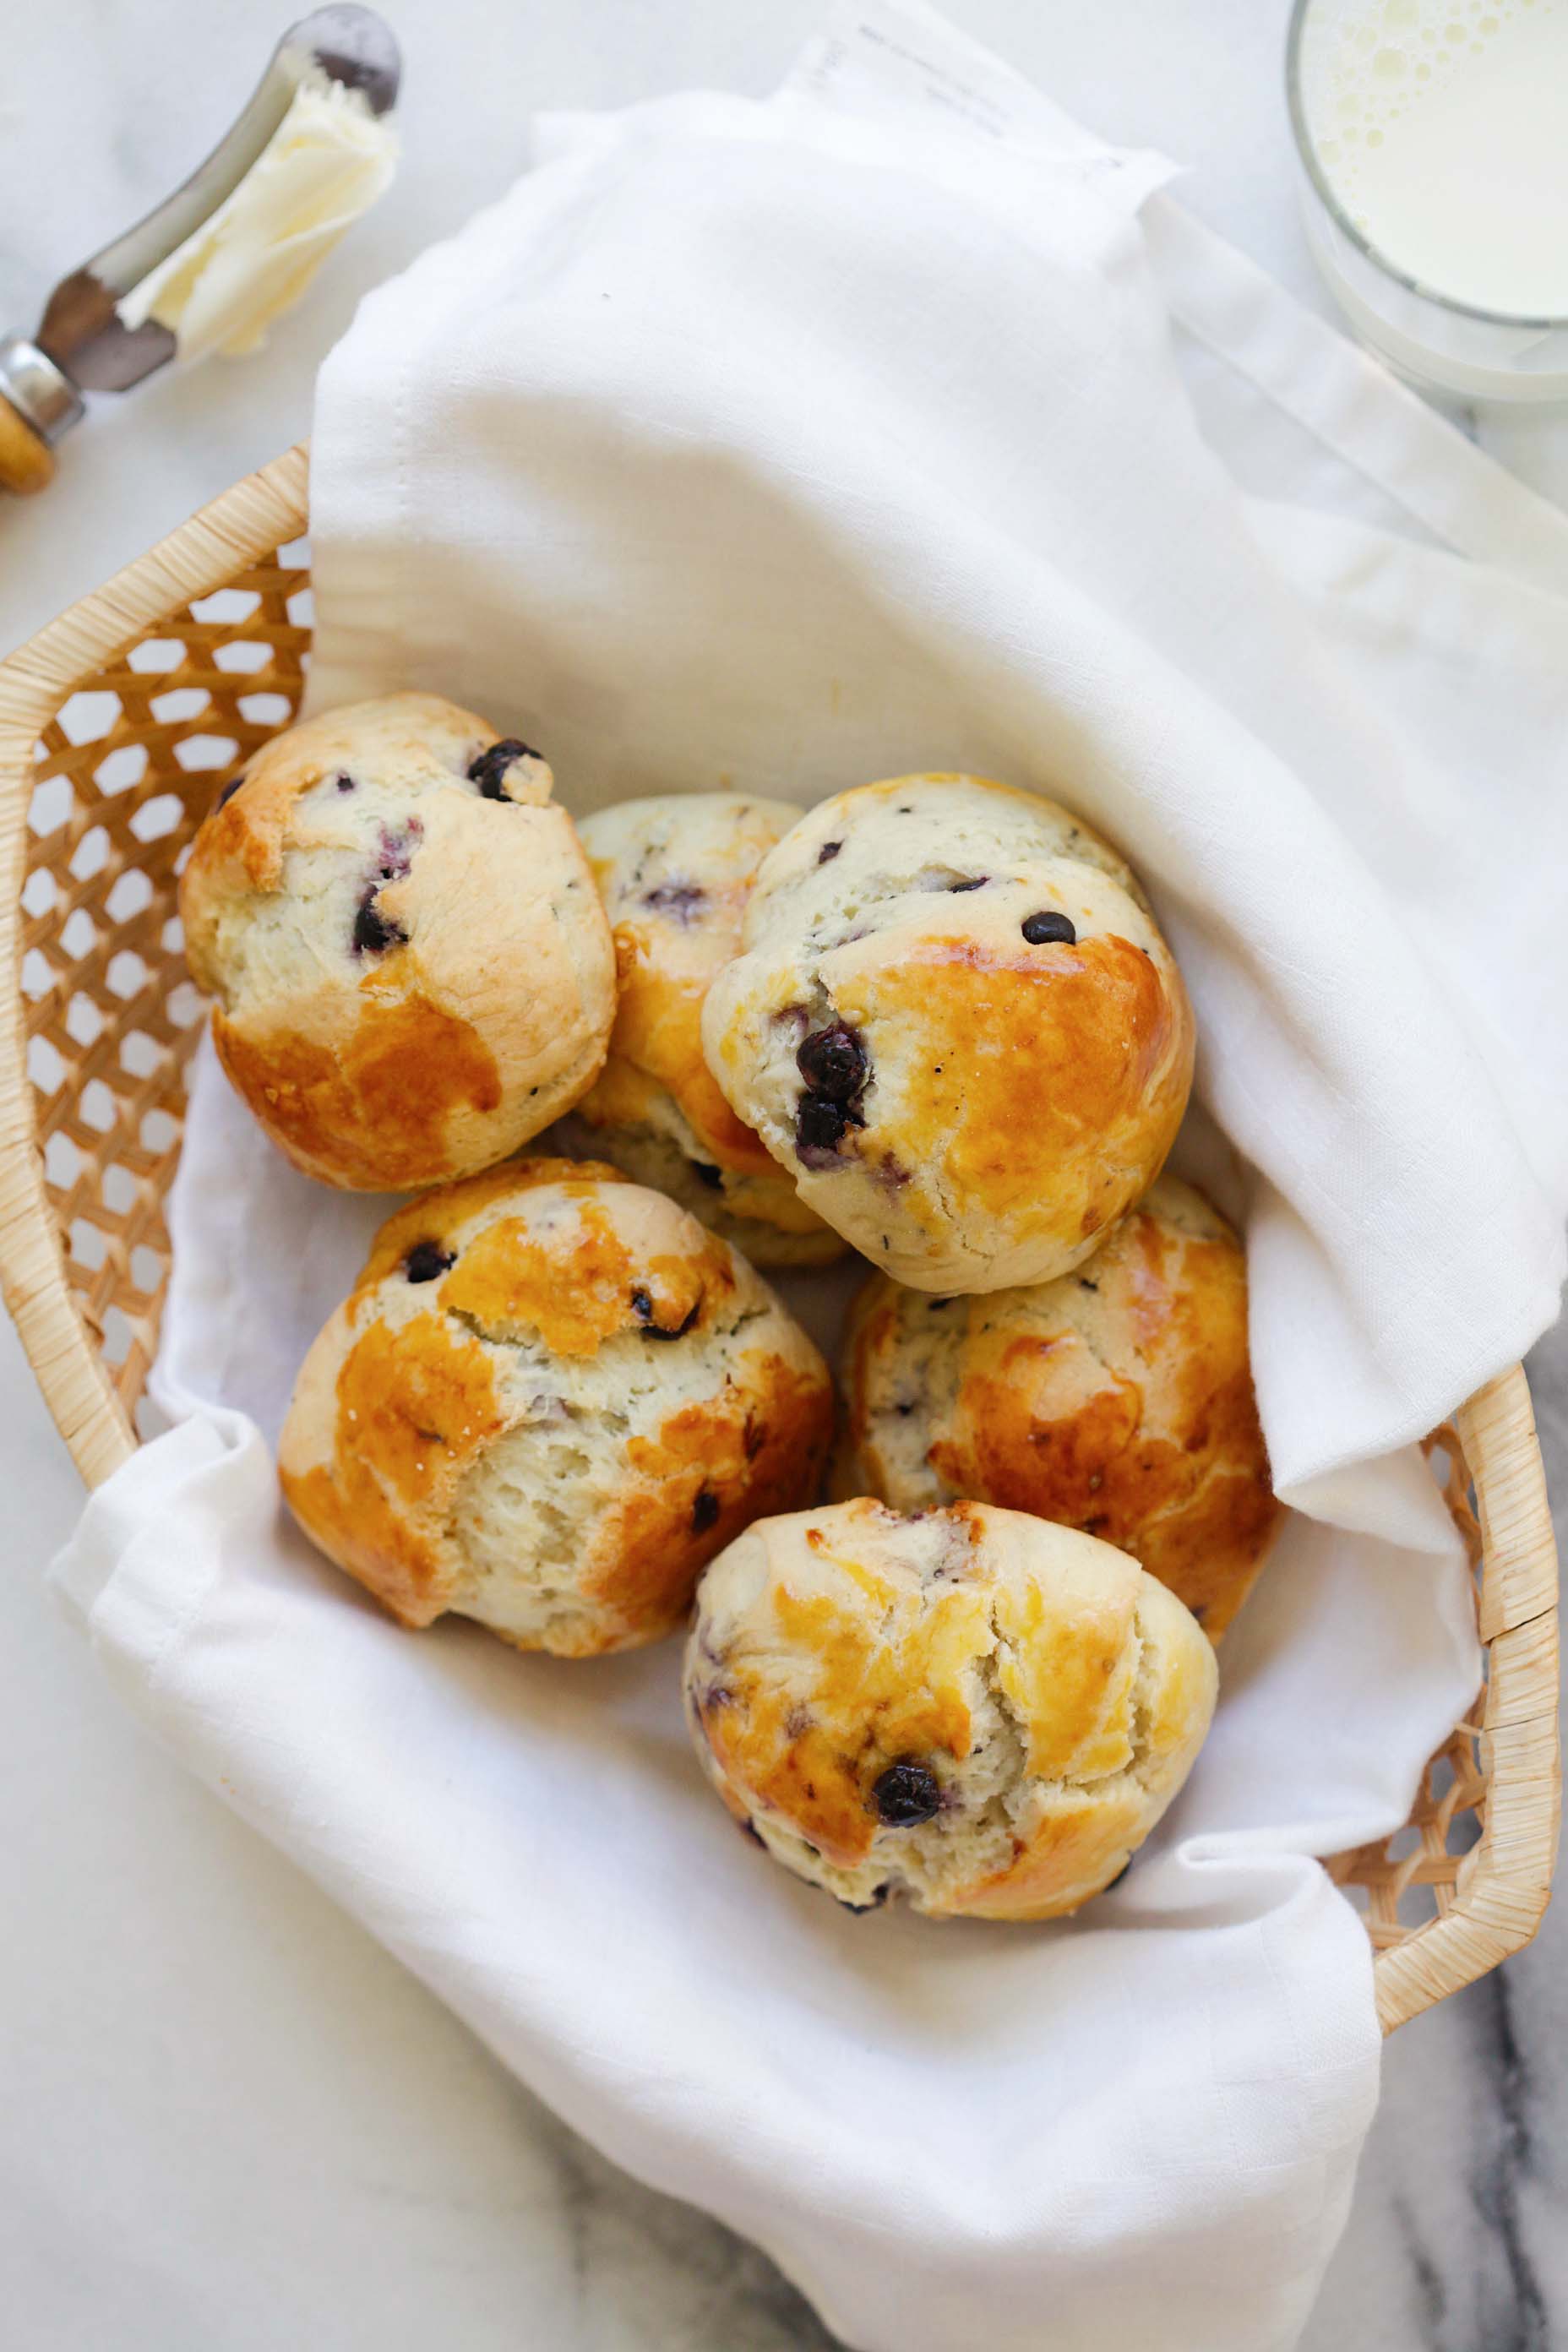 Delicious afternoon tea scones made with blueberries and placed in a basket.